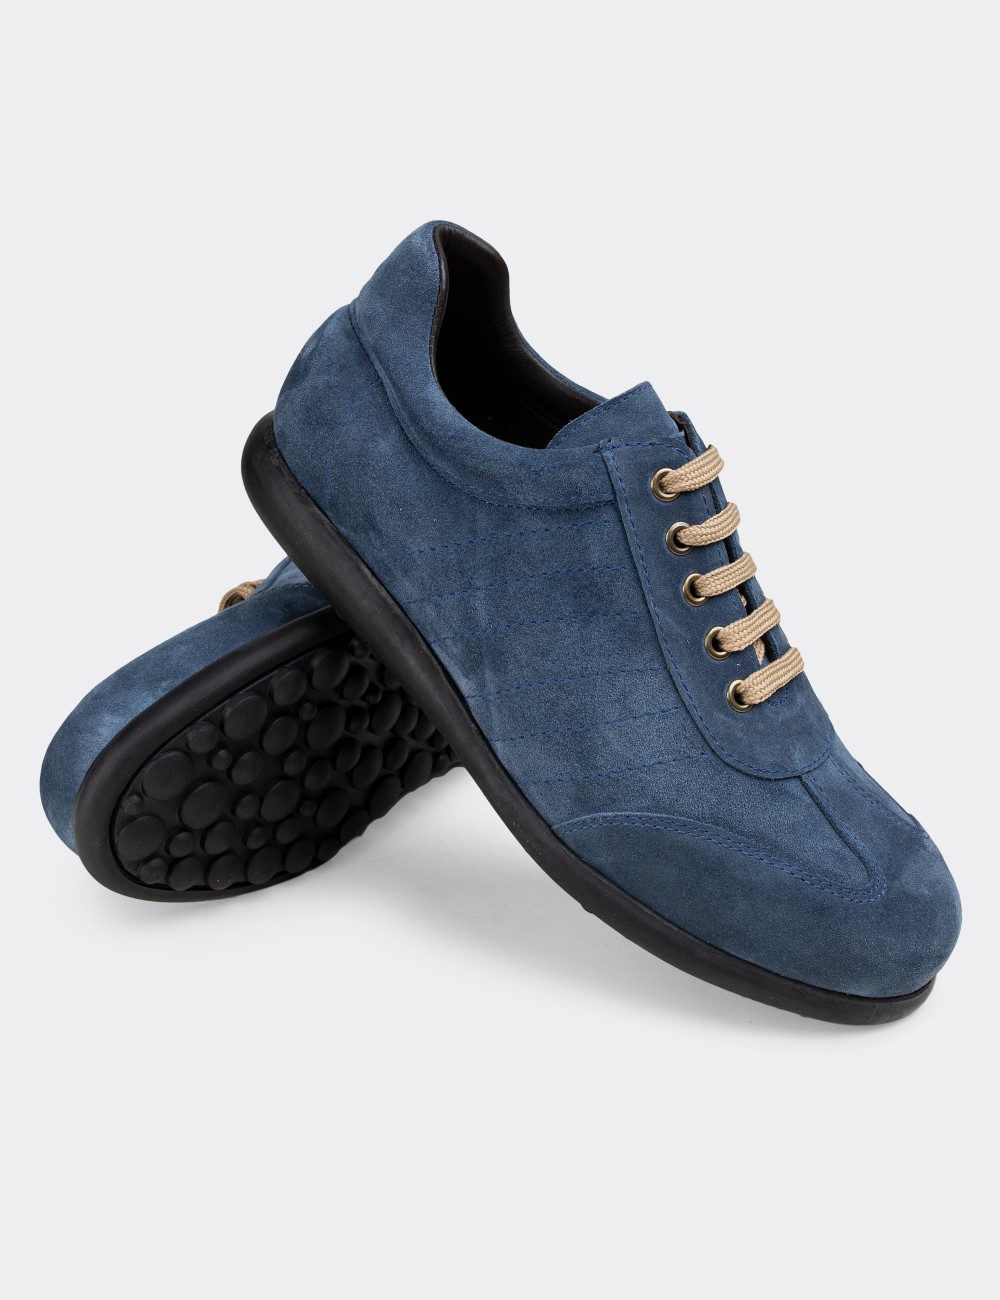 Blue Suede Leather Lace-up Shoes - 01826MMVIC08